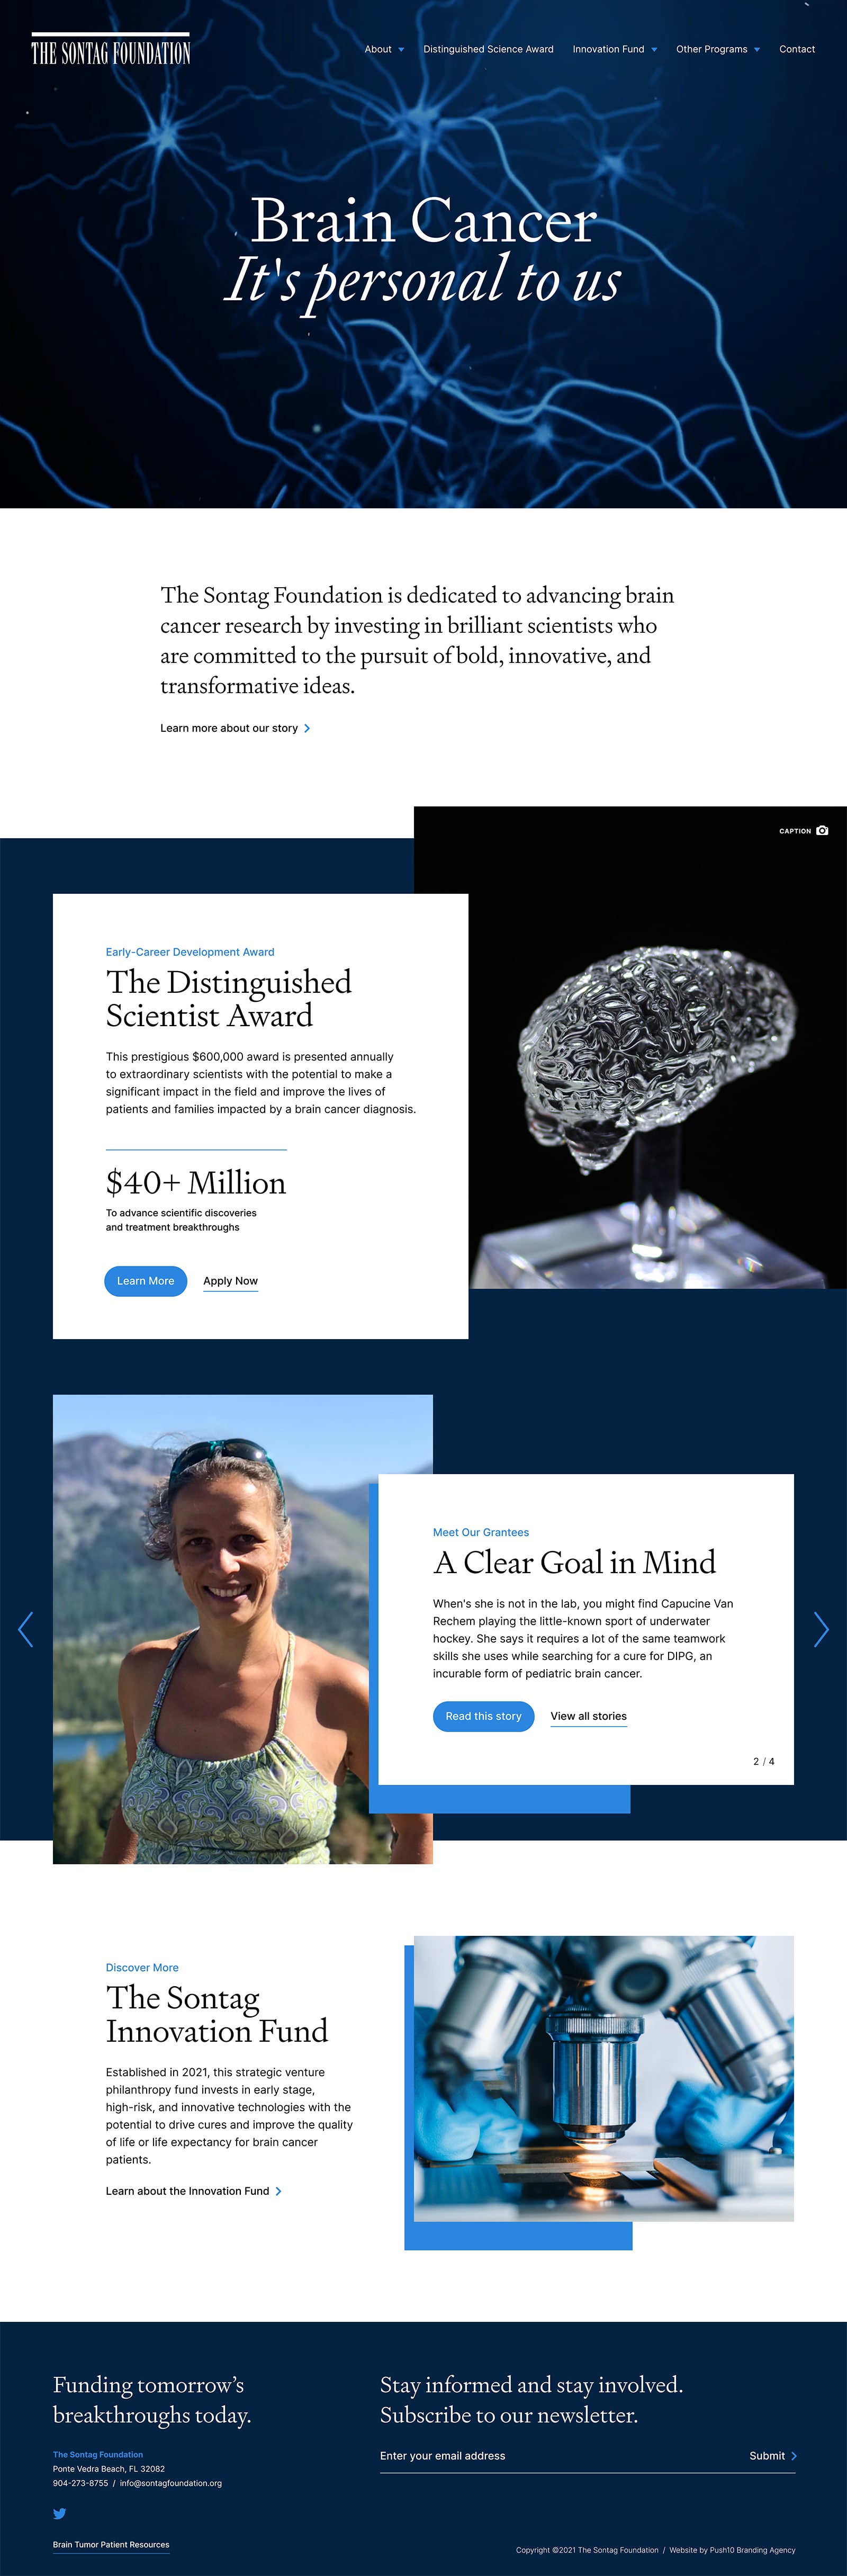 Homepage user interface design for The Sontag Foundation